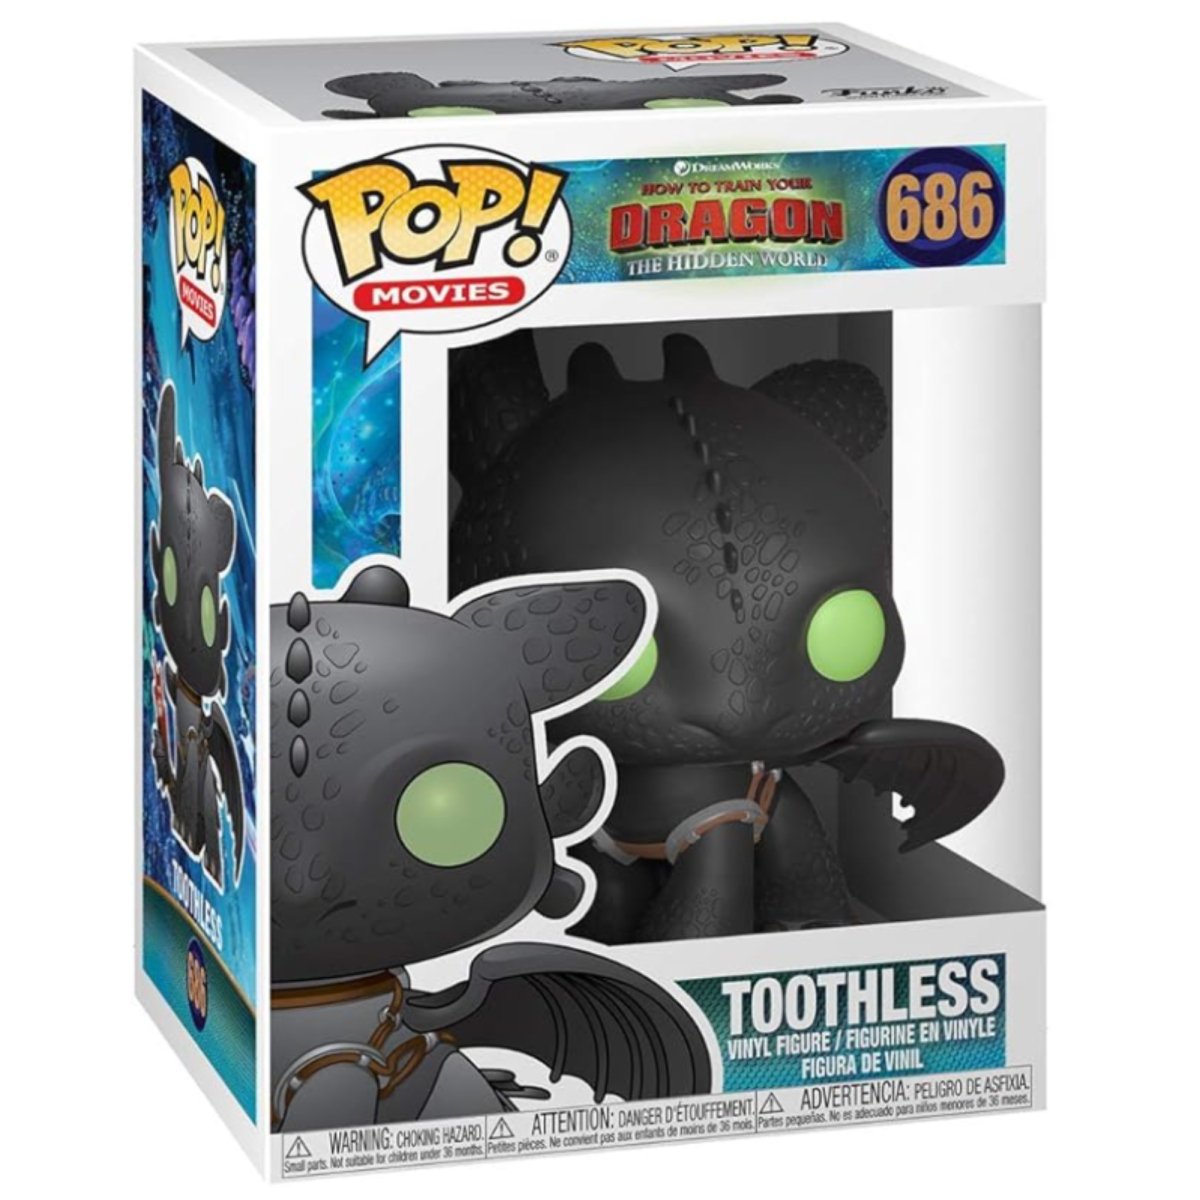 How To Train Your Dragon The Hidden World - Toothless #686 - Funko Pop! Vinyl Animation - Persona Toys